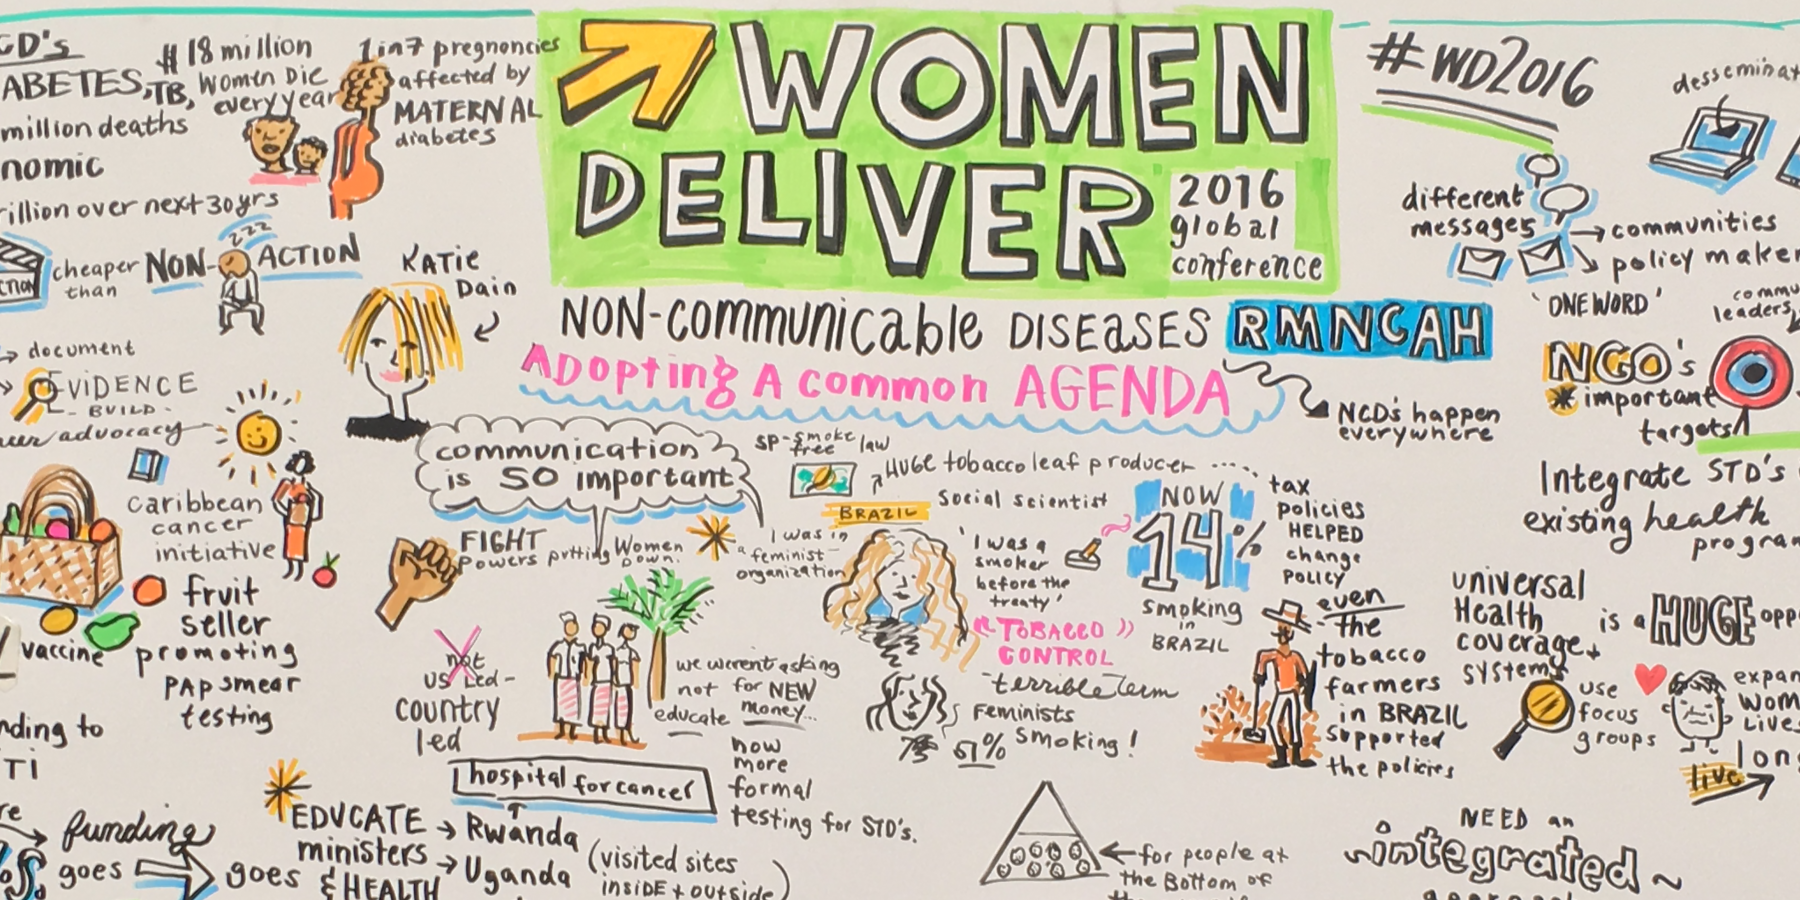 Visual notes from the joint advocacy session on Women and NCDs